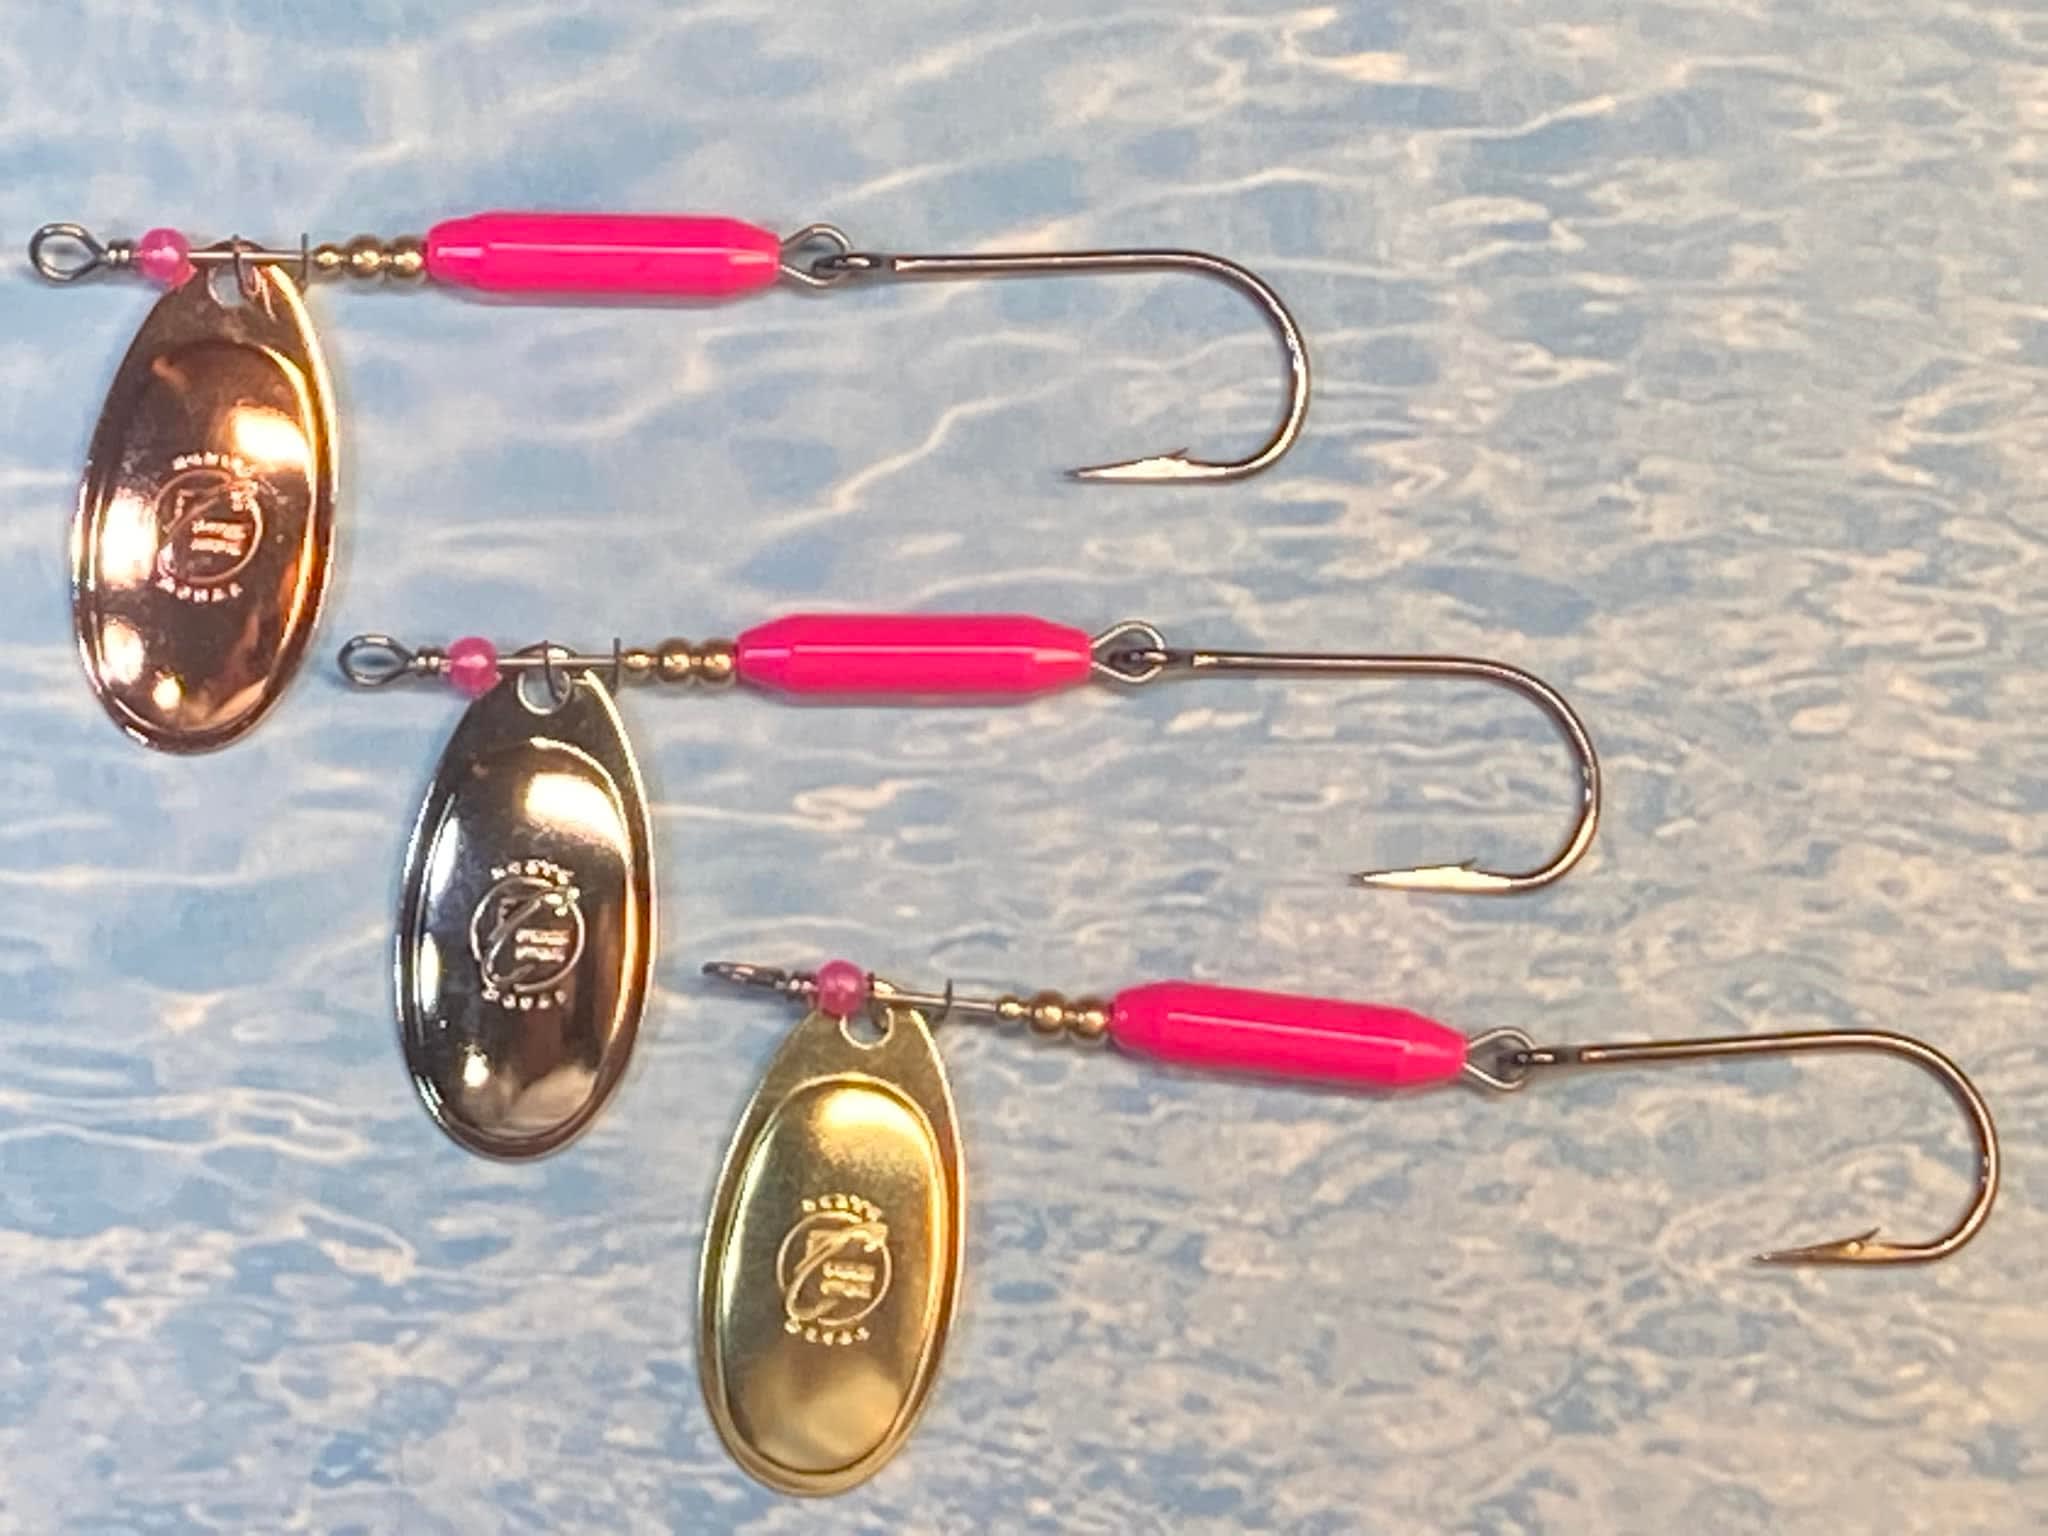 Orange on Silver/Scale Brass - Savage Micro Squid Spinners. - Kokanee and  Trout - Savage Micro Shrimp Spinners - Savage Strike Spinners